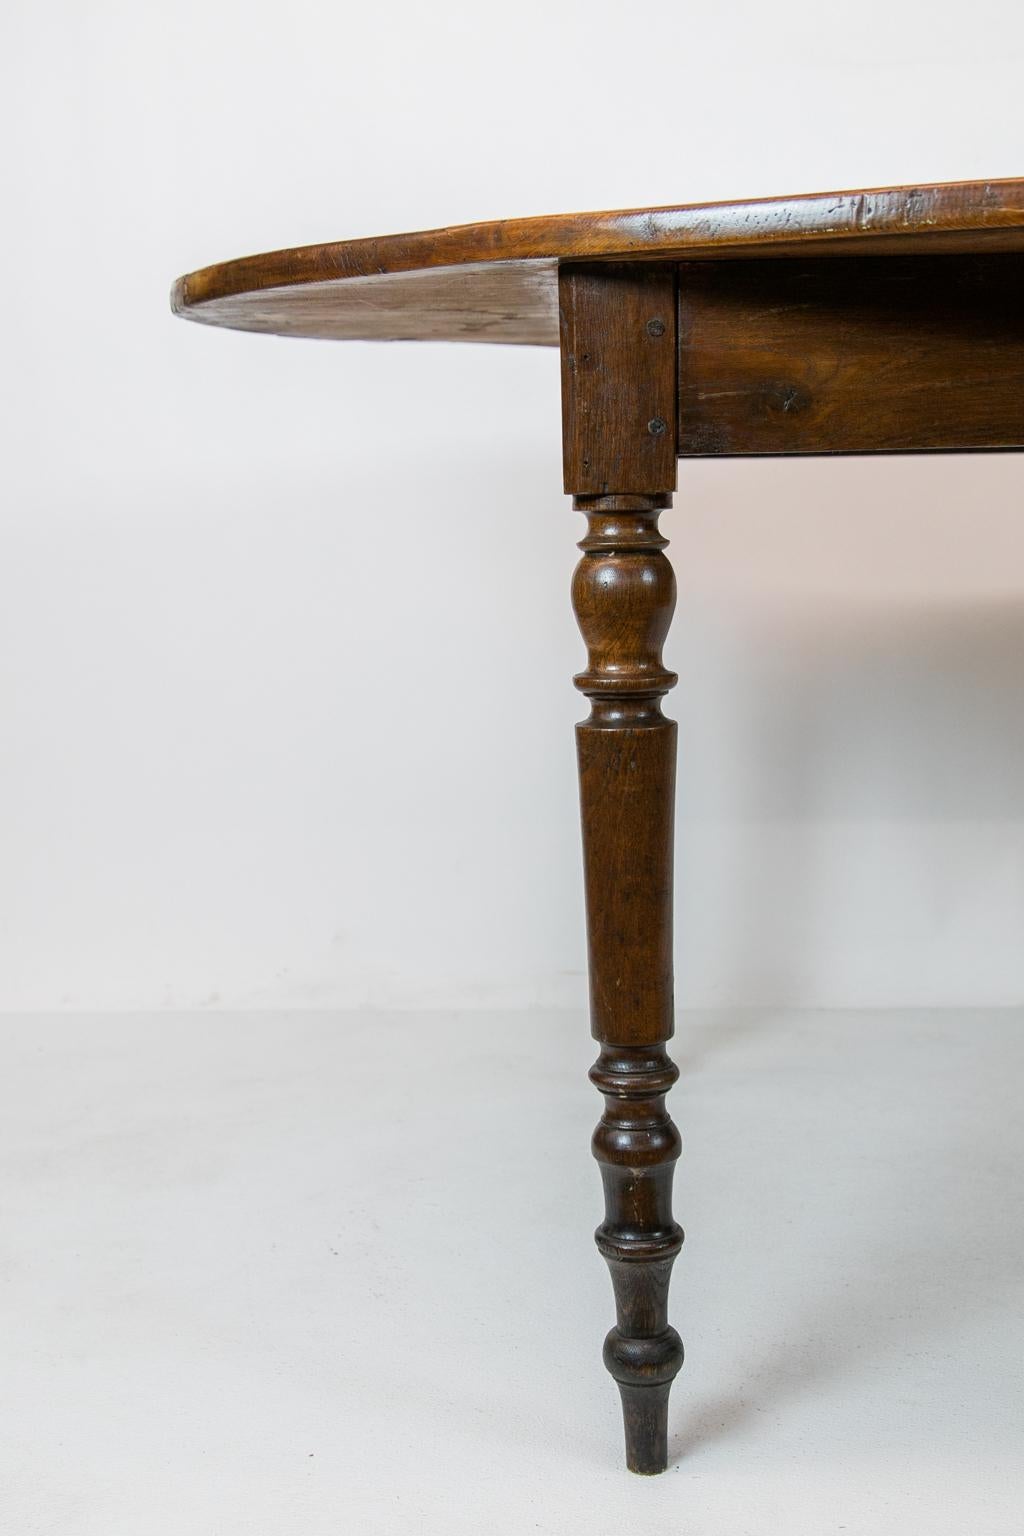 English oval pine kitchen table, with turned legs, it has a lovely color and patina.